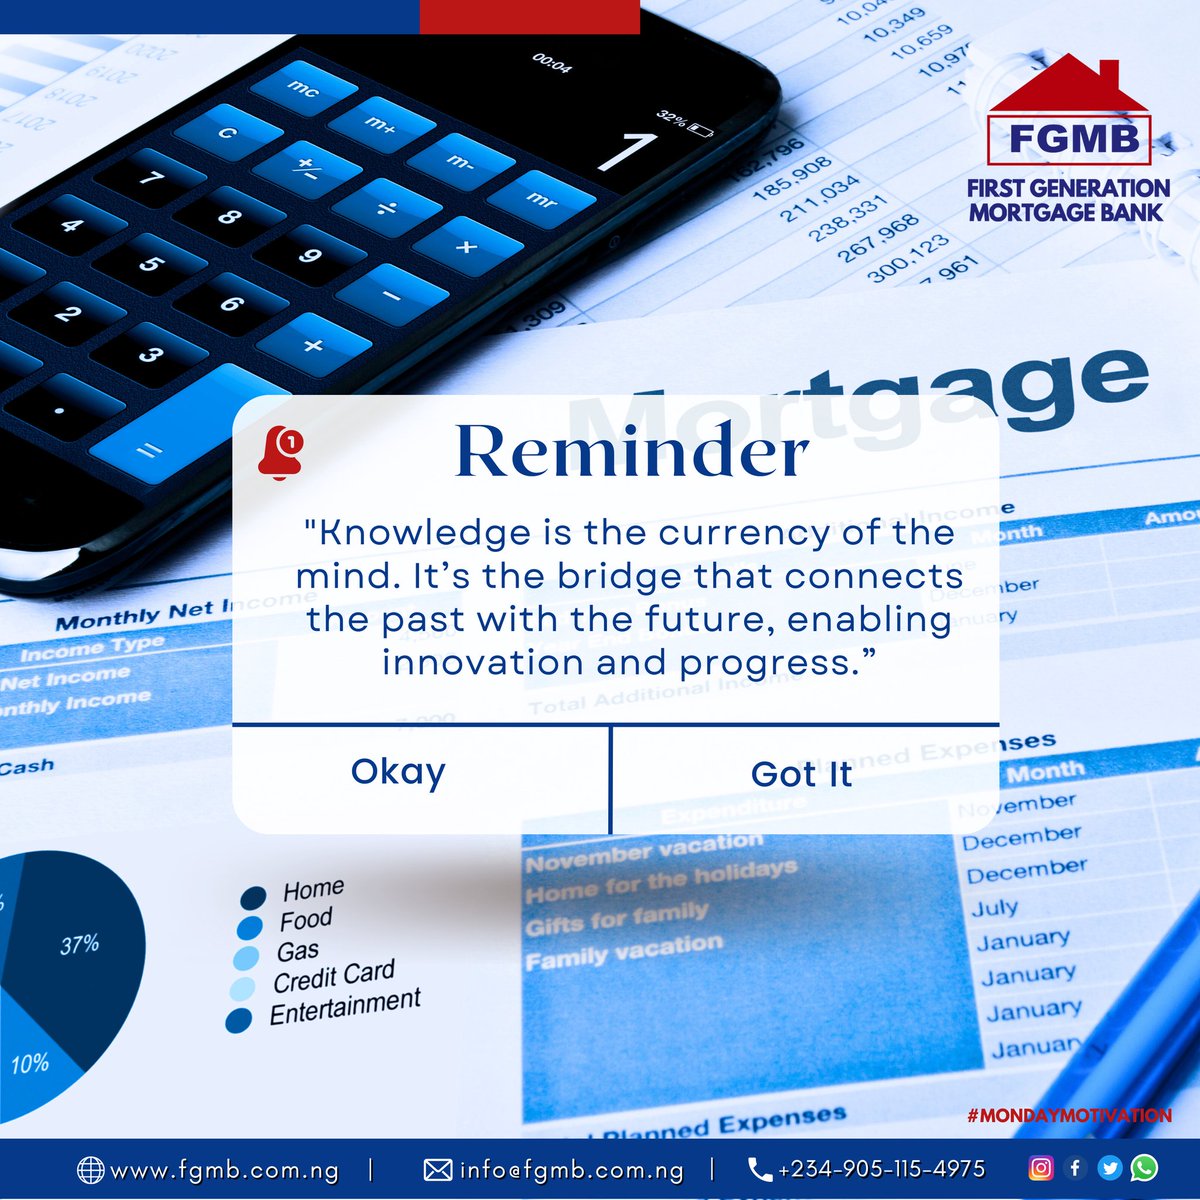 With knowledge comes understanding and with understanding comes power. Cheers to a fulfilled week. 👍

Call/WhatsApp 09051154976
Visit us for your mortgage enquiries.

#fgmb #mondayreminder #mortgagemondays #KnowledgeIsPower